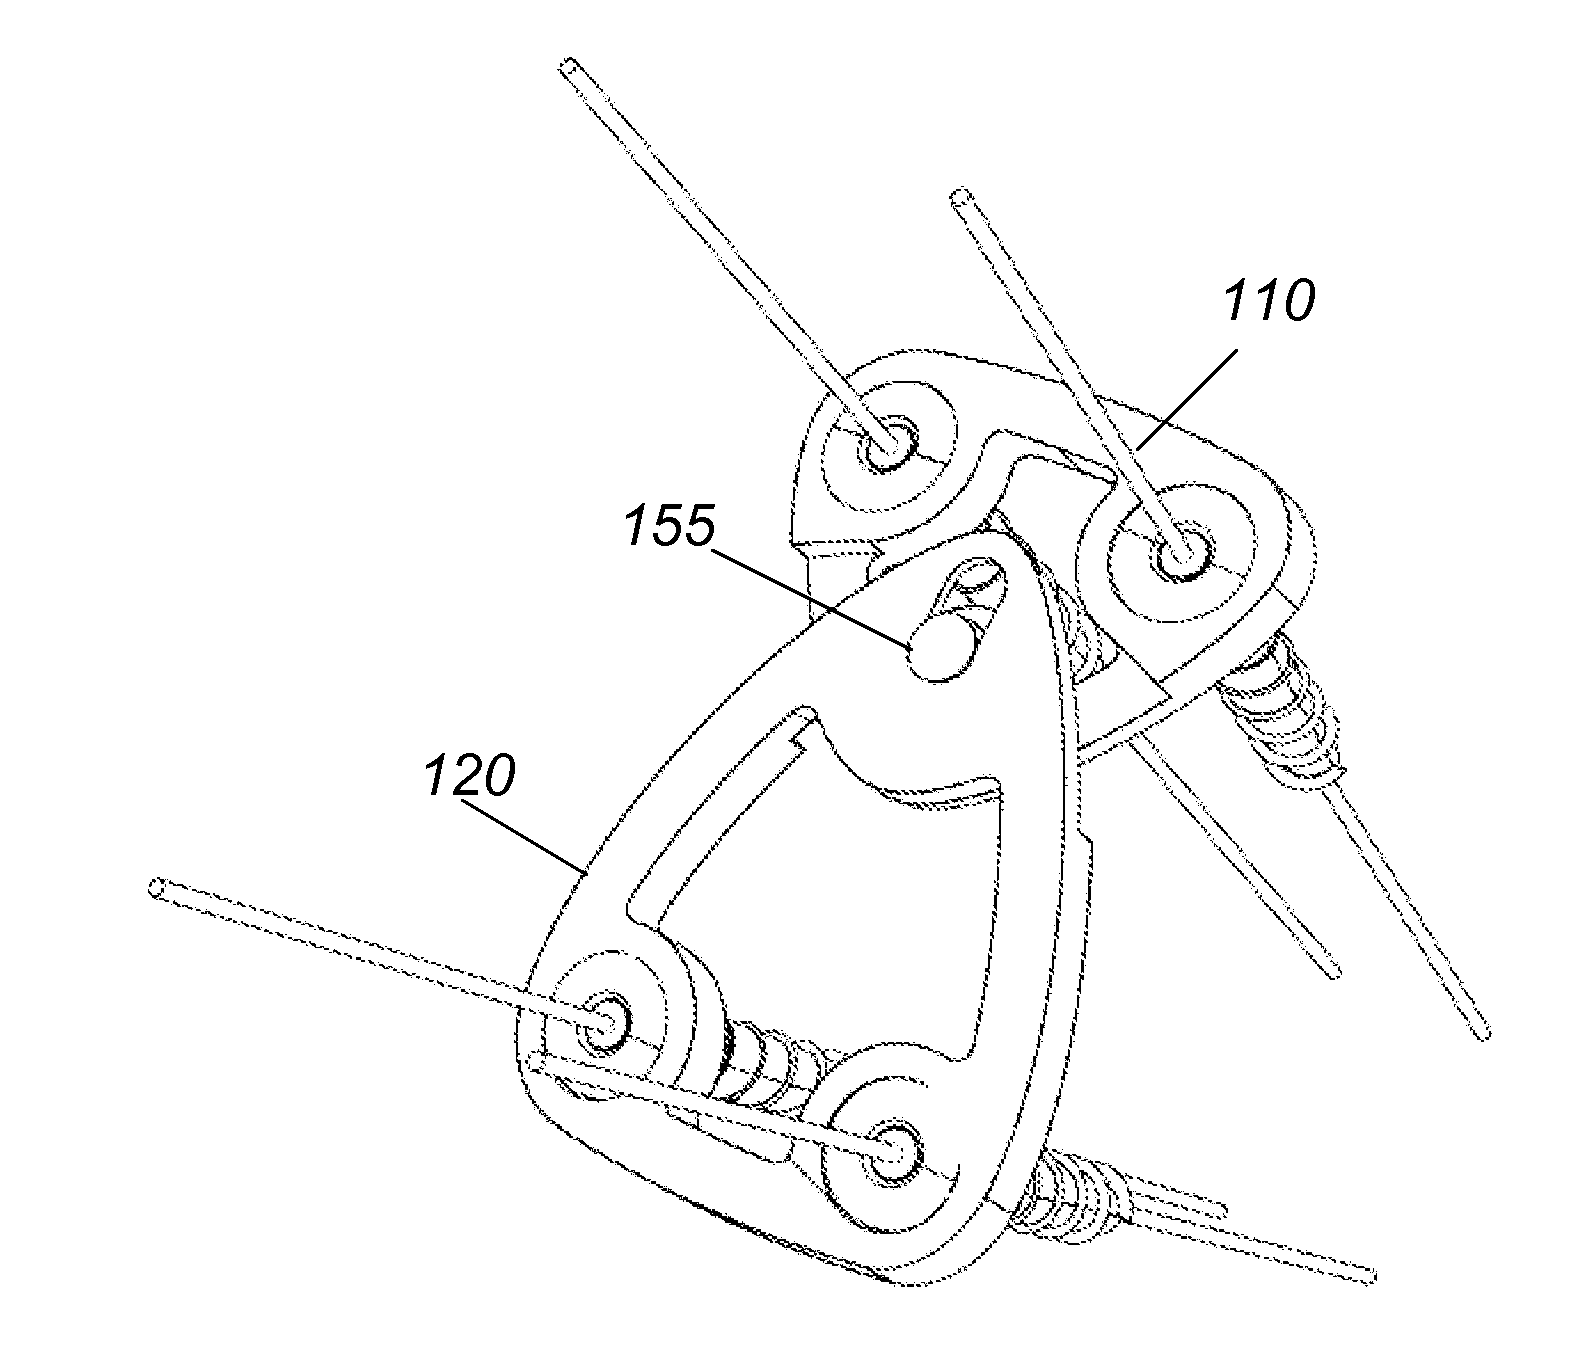 Methods and devices for static or dynamic spine stabilization